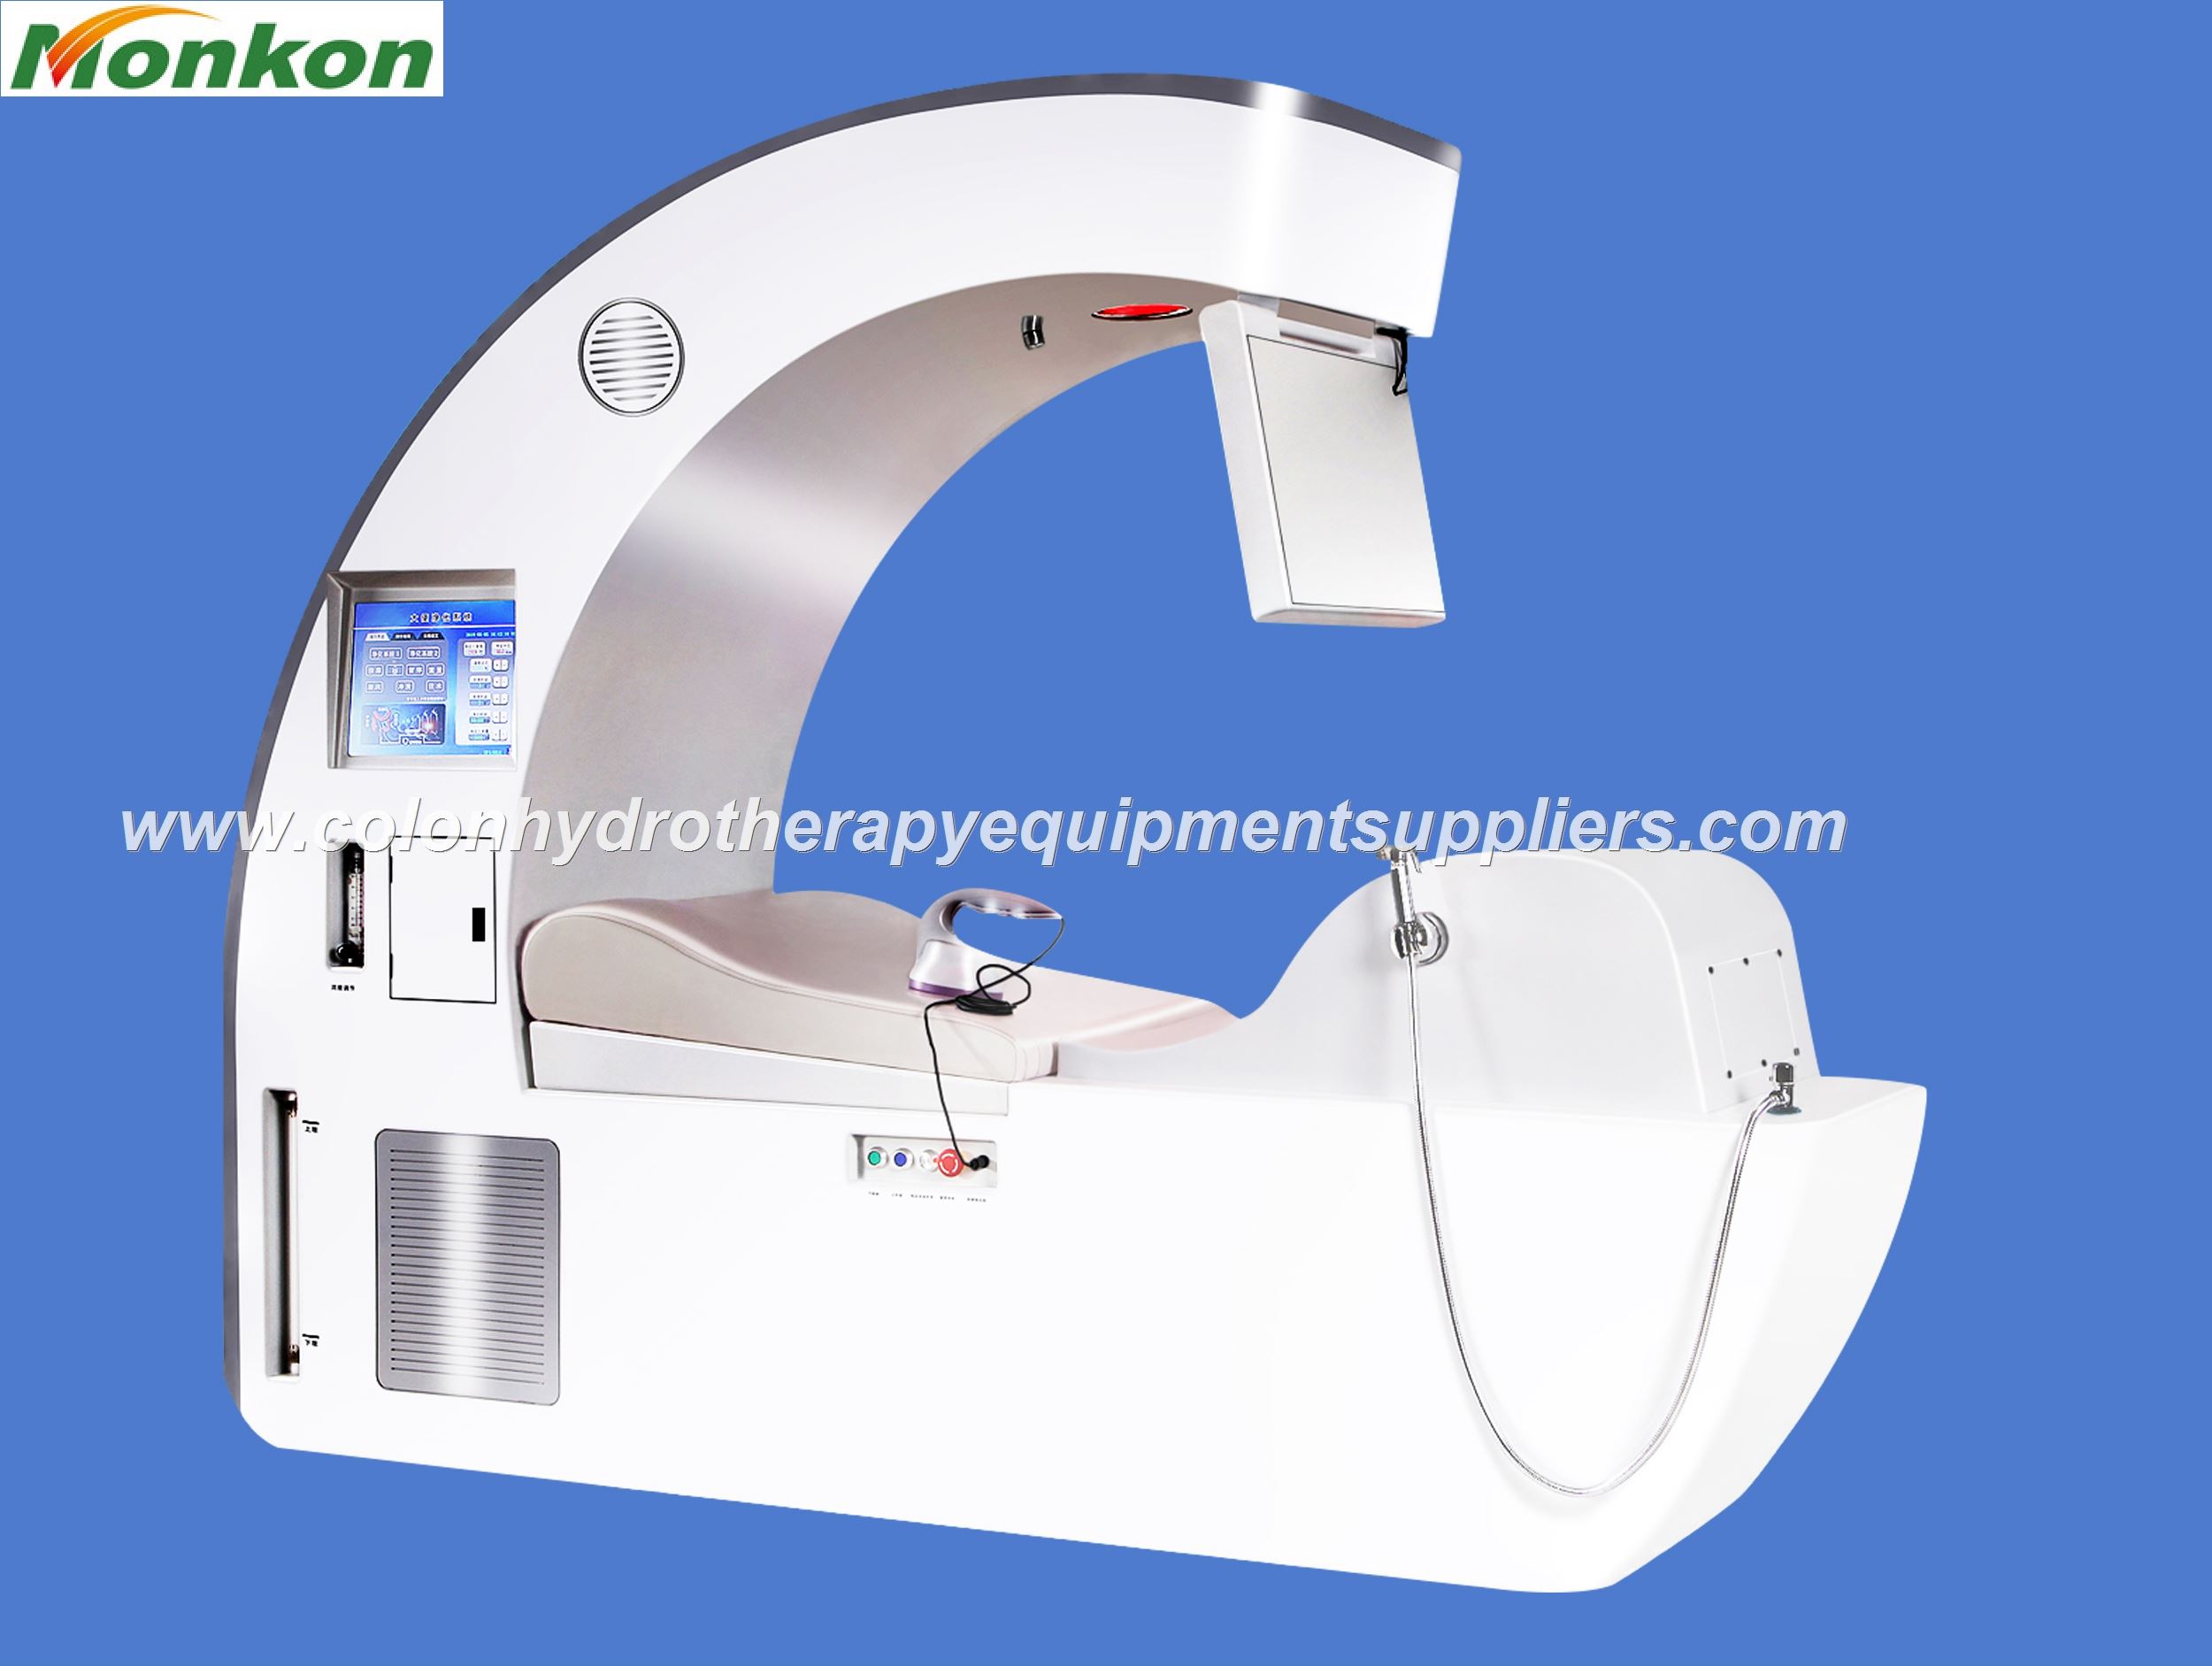 Colon Hydrotherapy Equipment Suppliers